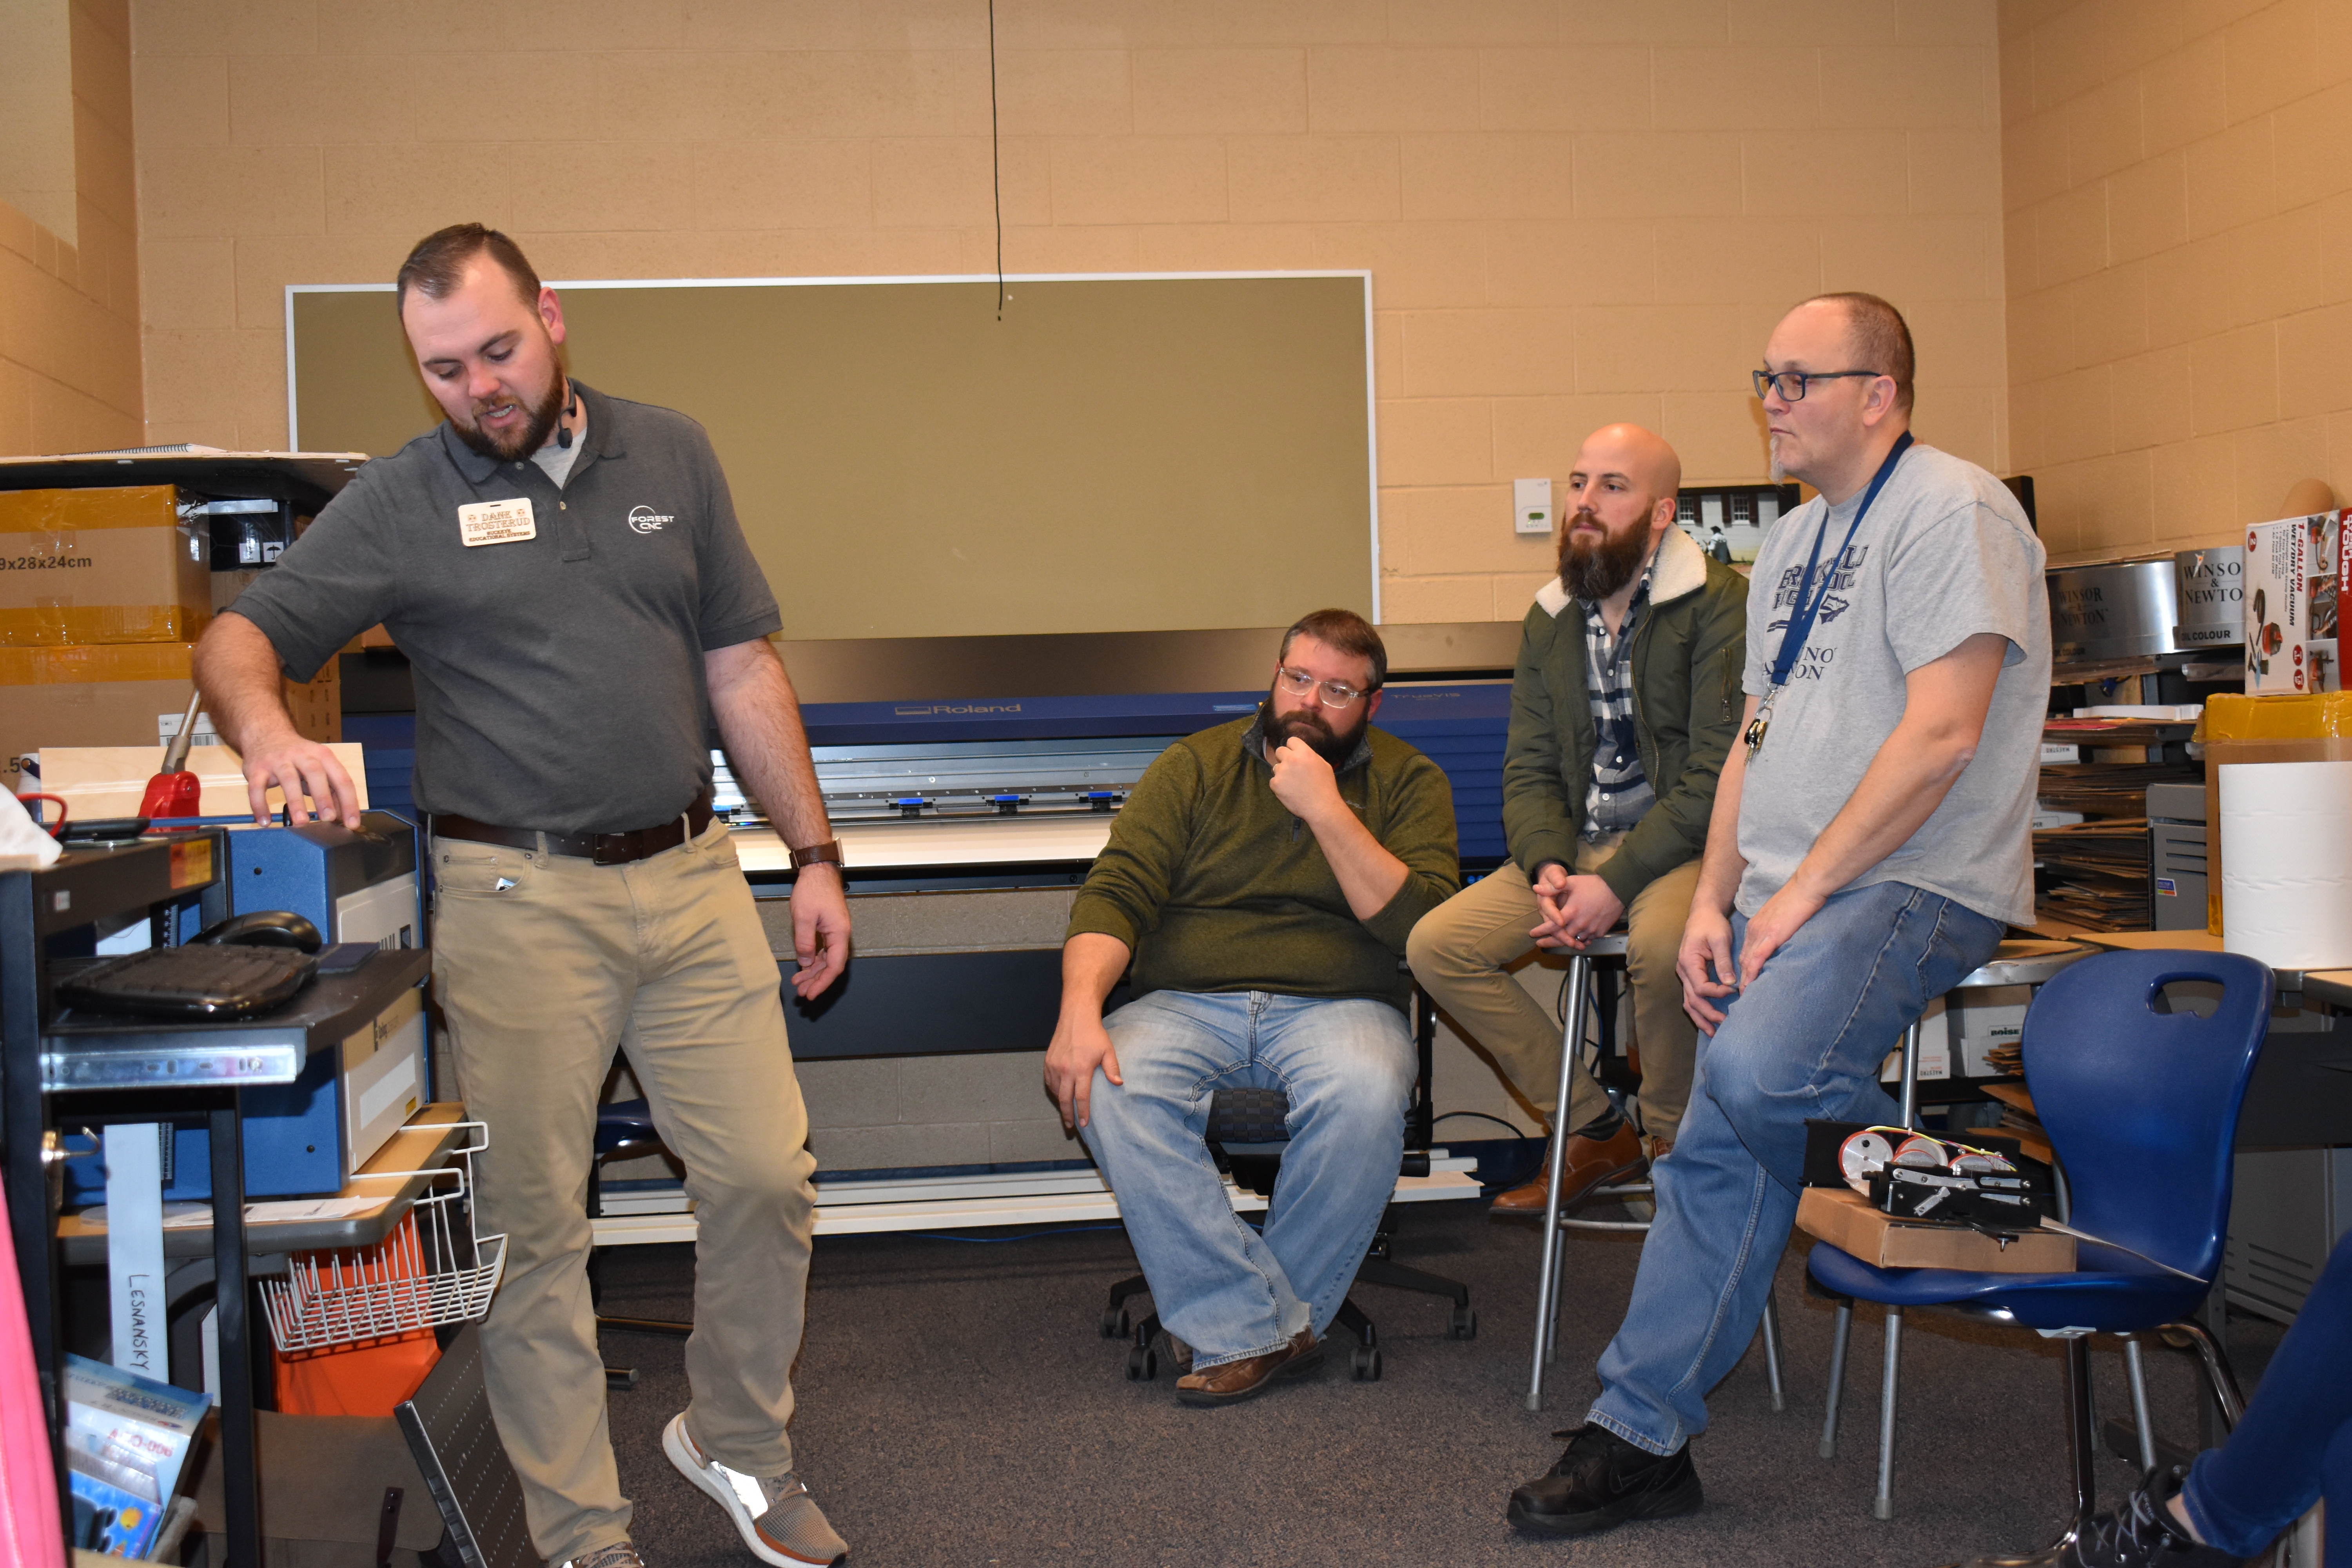 Dane Troserud, left, explains the operation of a laser cutter to Brookfield teachers, from right, Jim Haywood, Joe Meyer and Ken Iser.